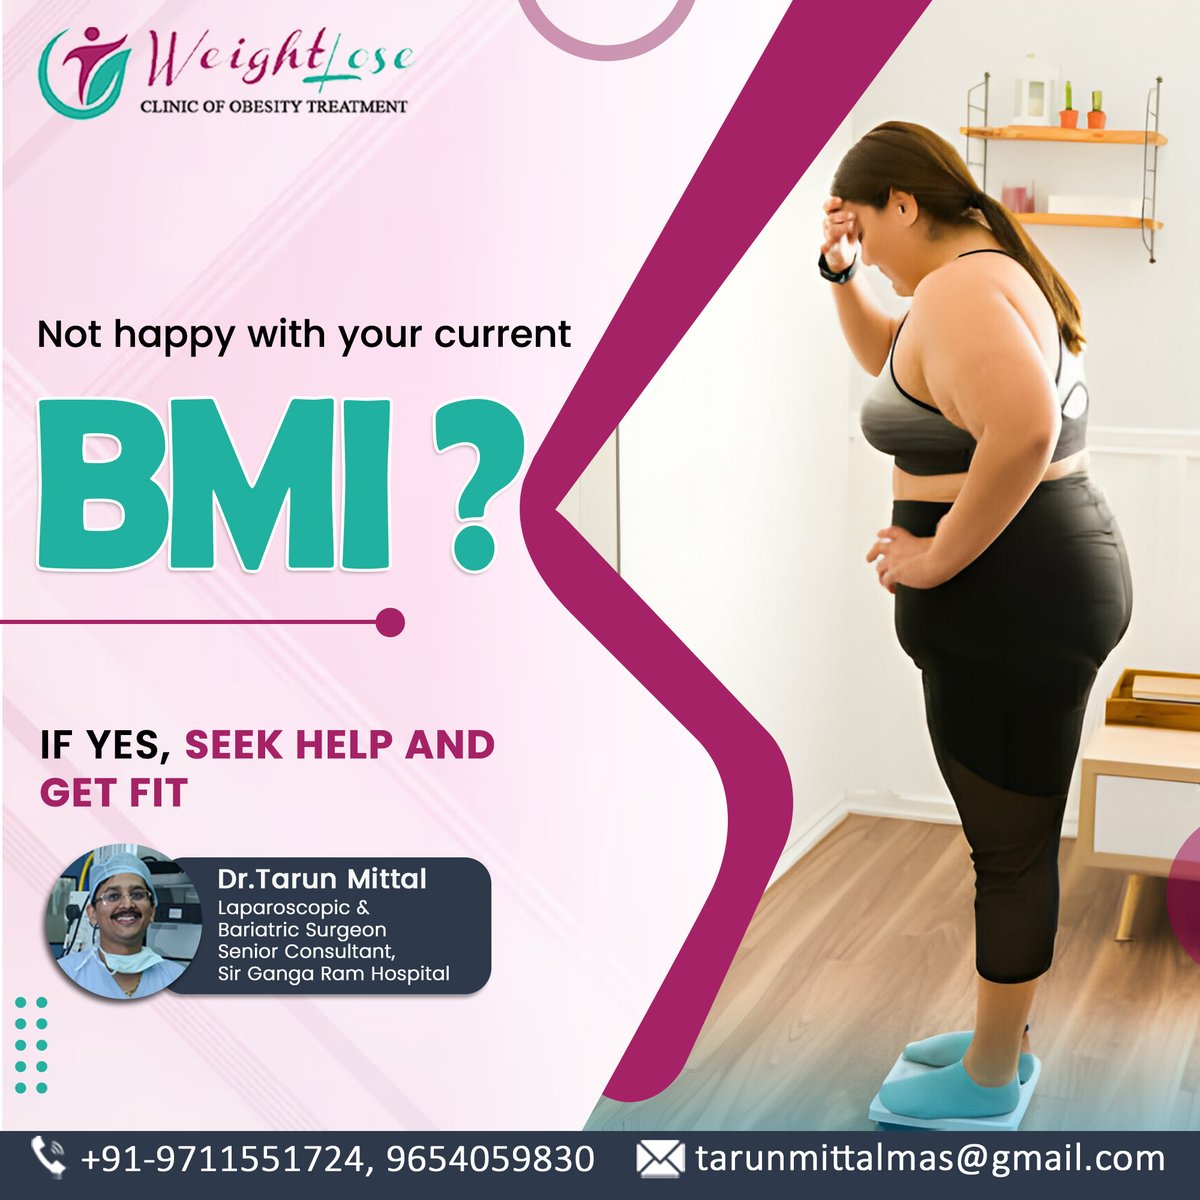 Feeling dissatisfied with your current BMI? It's time to take action and prioritize your health👨🏻‍⚕️. Seek professional help from our weightloseclinic 🏥 and embark on a journey to a fitter, healthier you. Don't let dissatisfaction hold you back –